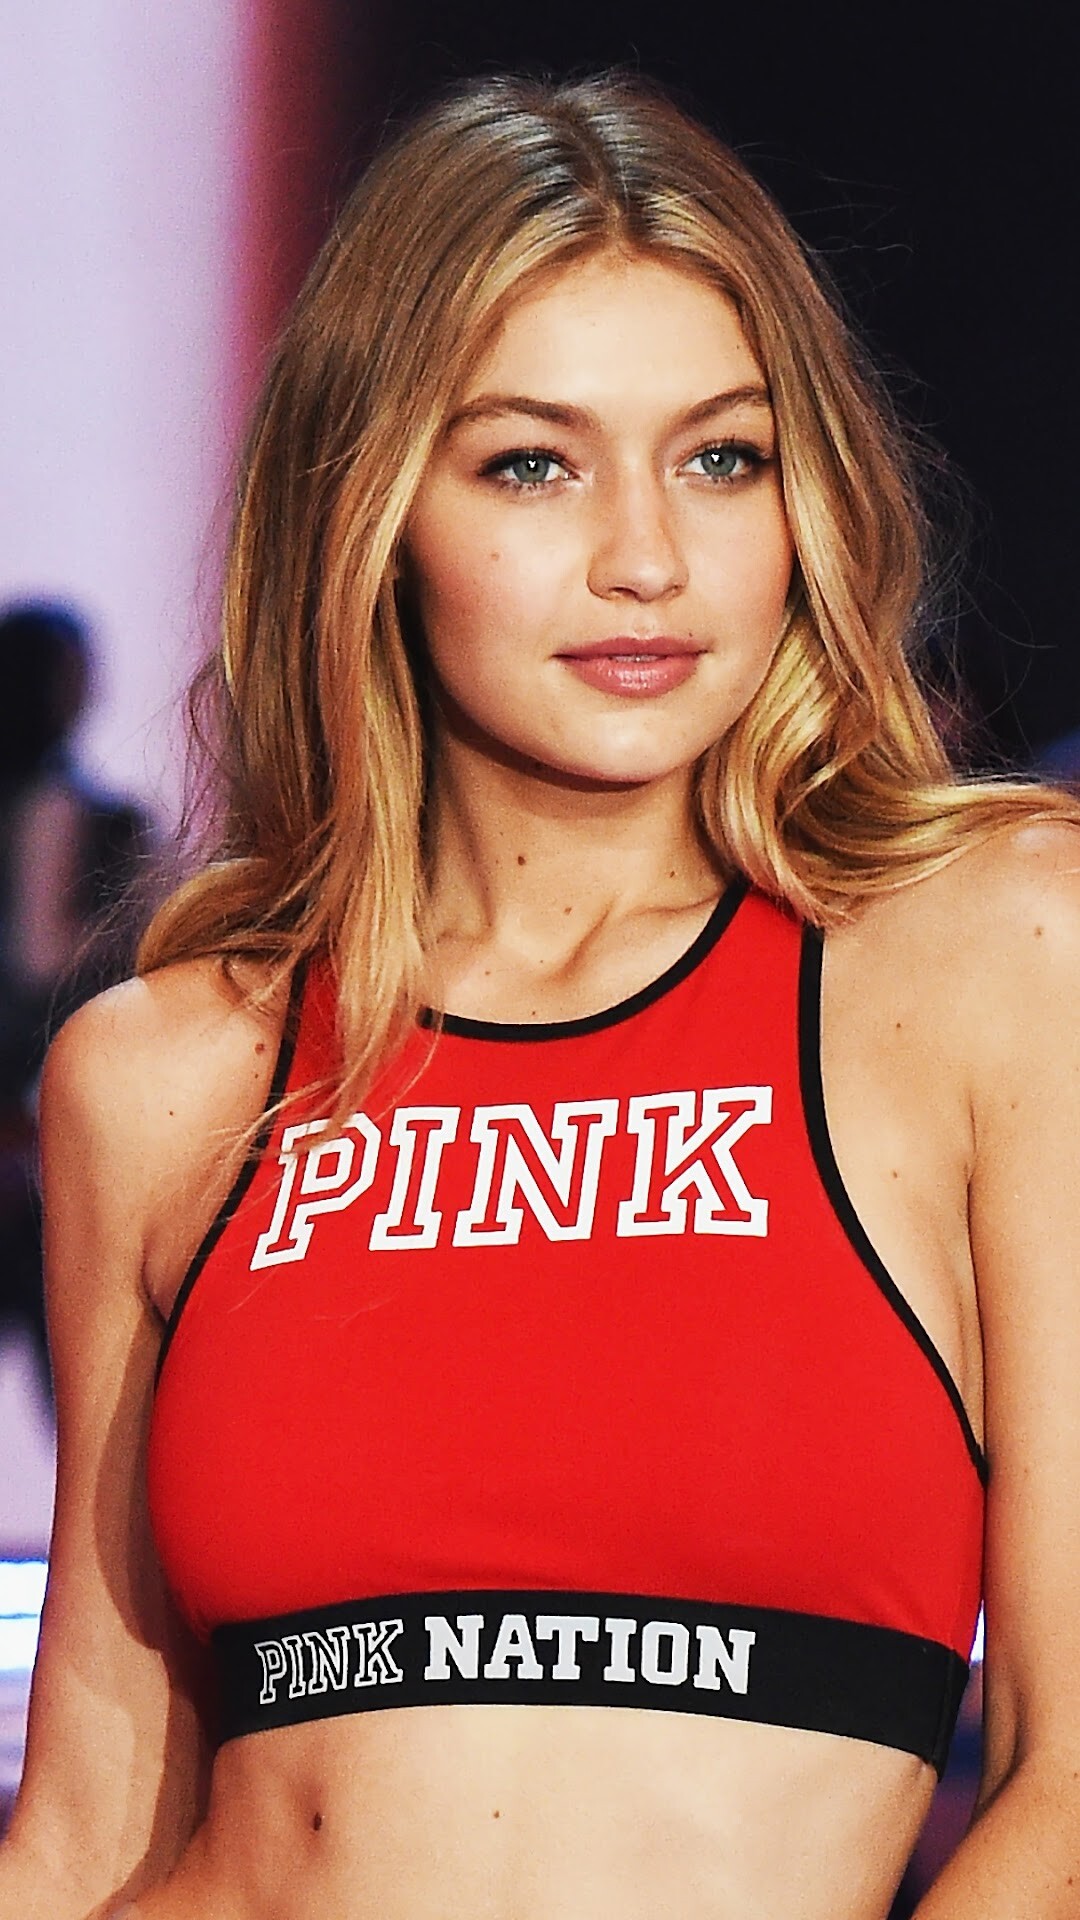 Victoria’s Secret: Gigi Hadid, Pink, A division of VS, owned by American retail company L Brands. 1080x1920 Full HD Wallpaper.